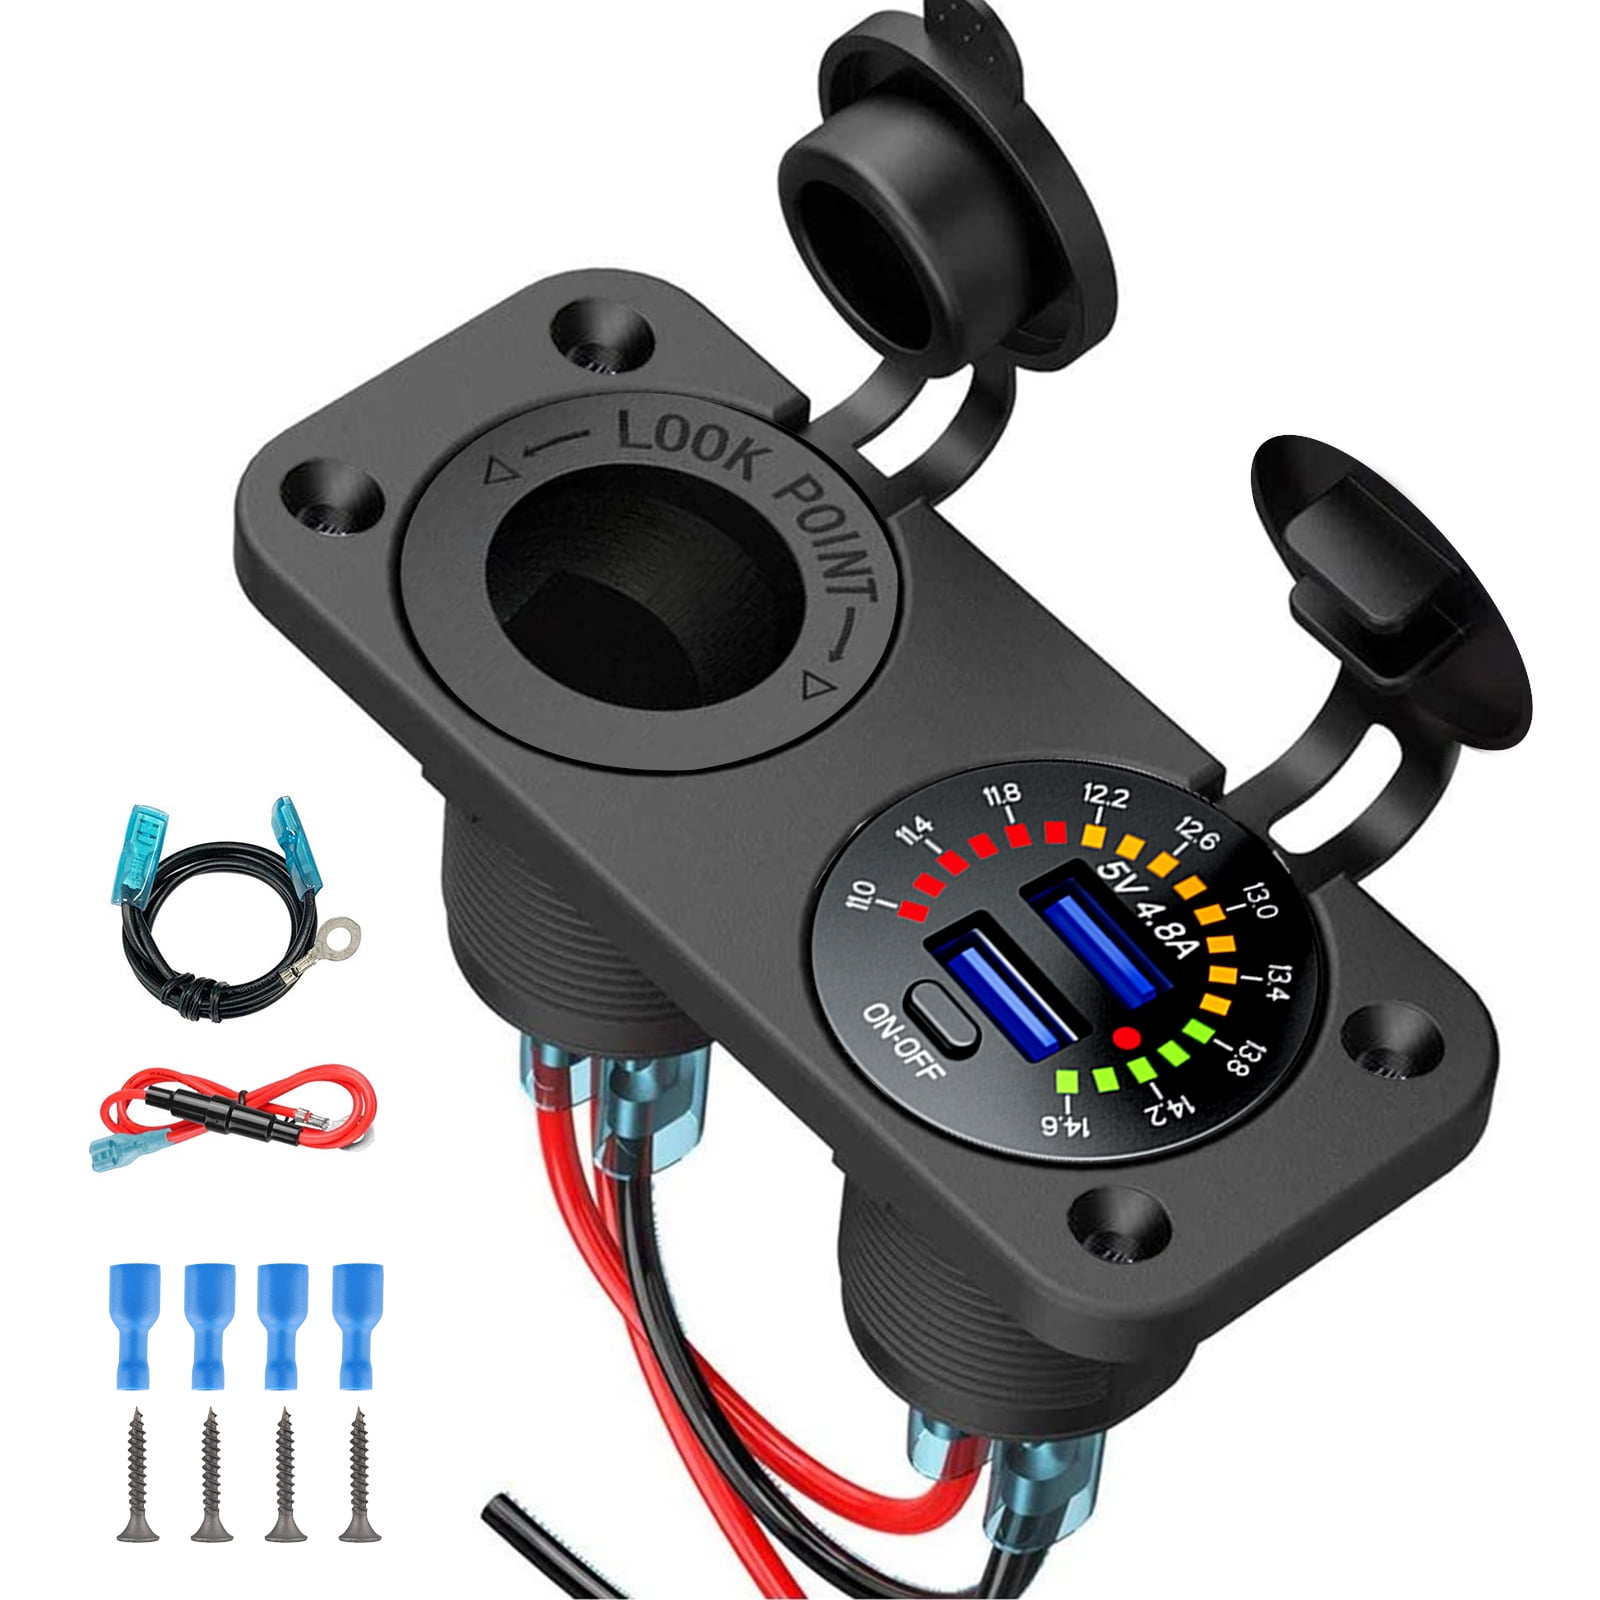 Sampow IP66 Waterproof Dual USB QC3.0 Fast Charging Socket Power Outlet with LED Digital Voltmeter and 20A Wire Fuse kit for 12V-24V Car Boat Marine Rv Motorcycle Quick Charge 3.0 USB Charger Socket